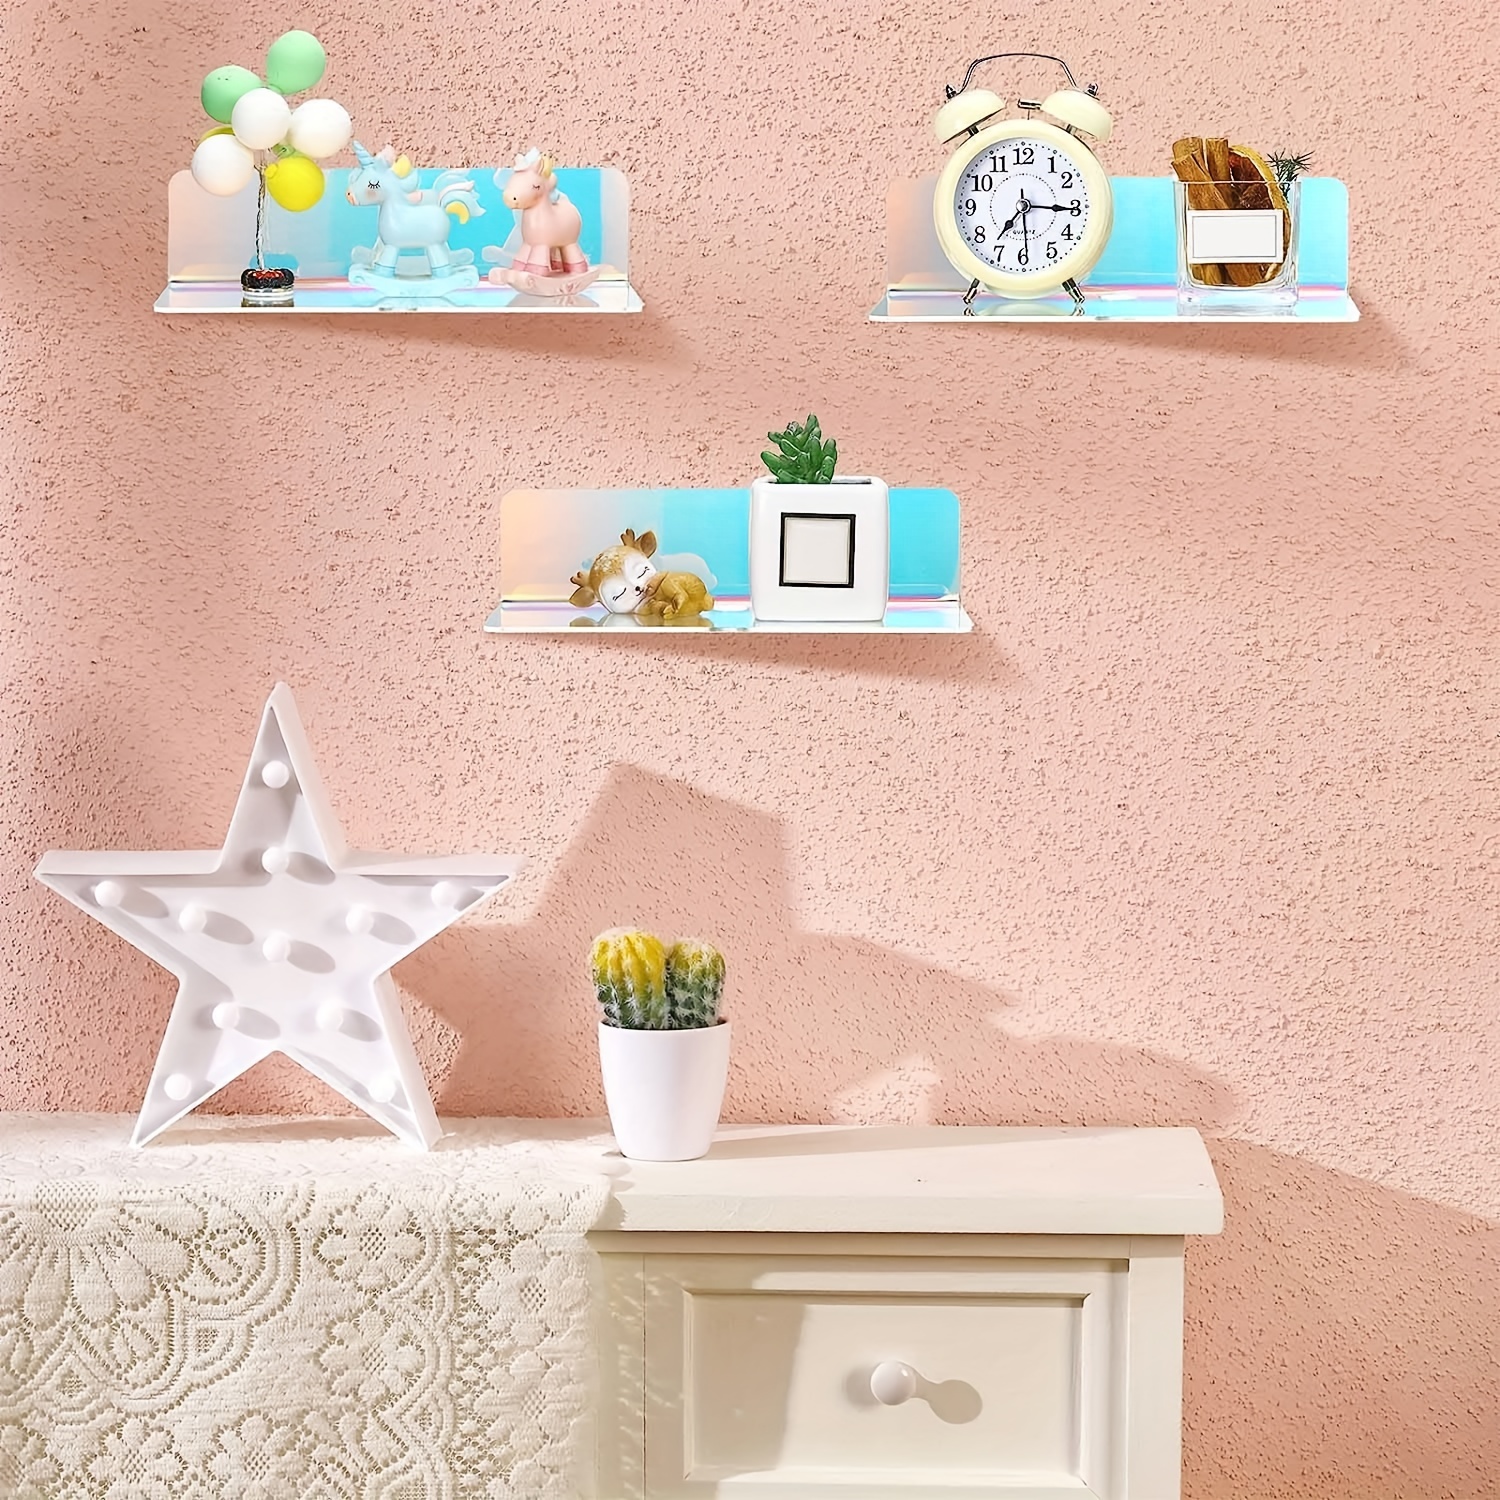 8 Pieces Acrylic Floating Wall Shelves 9 Inches Adhesive Floating Shelf  Screwless Shelves Hanging Shelves Small Self Adhesive Display Shelf for  Smart